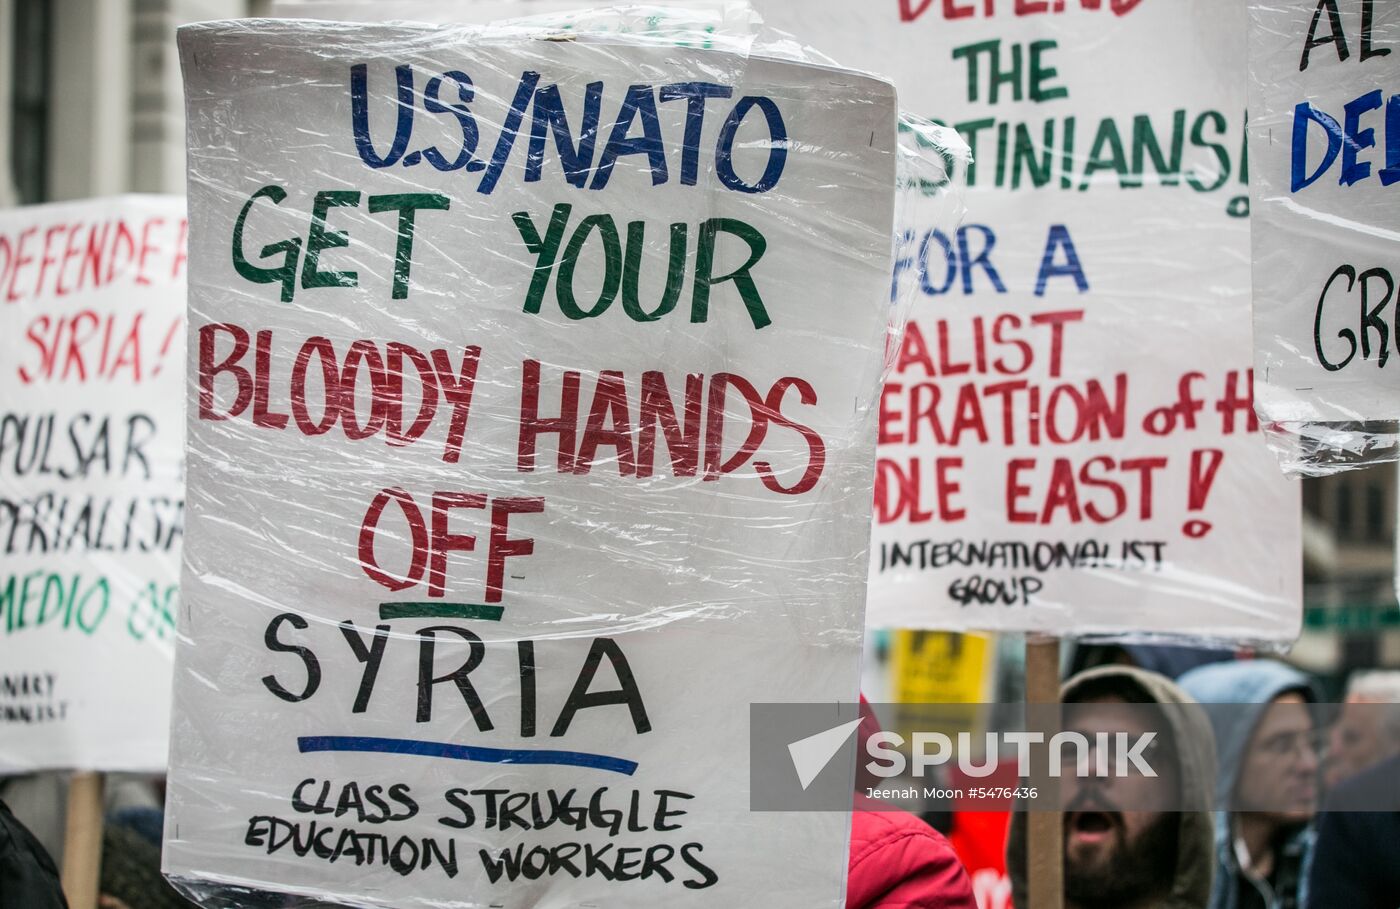 Protest in US against strikes on Syria